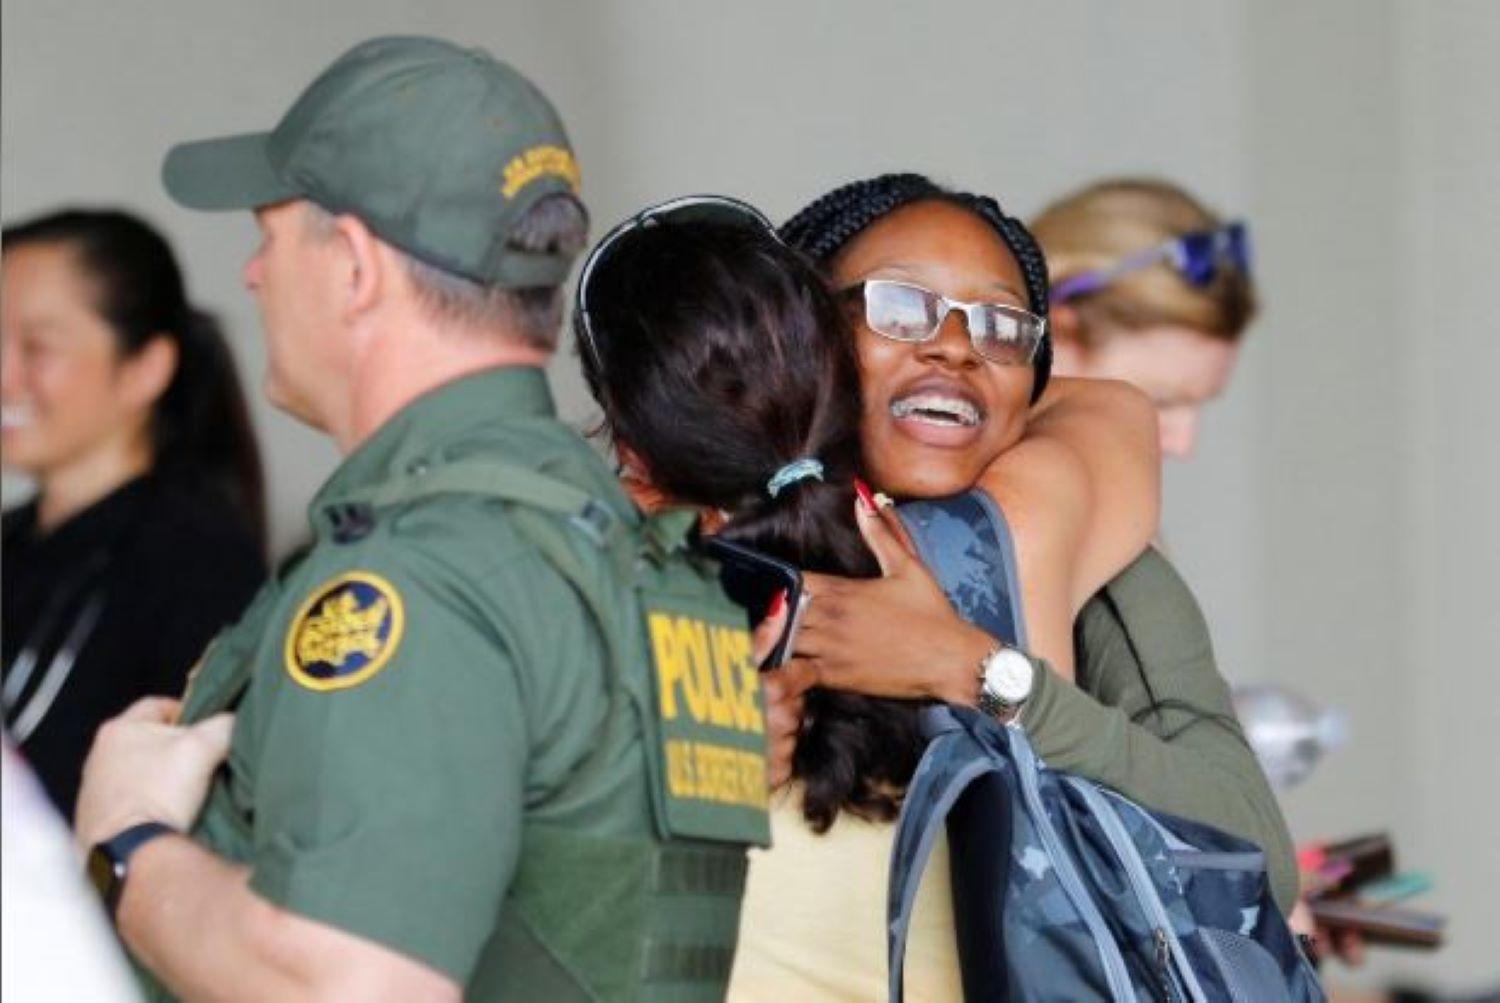 Hundreds of weary, hopeful Bahamas evacuees arrive in Florida by ship